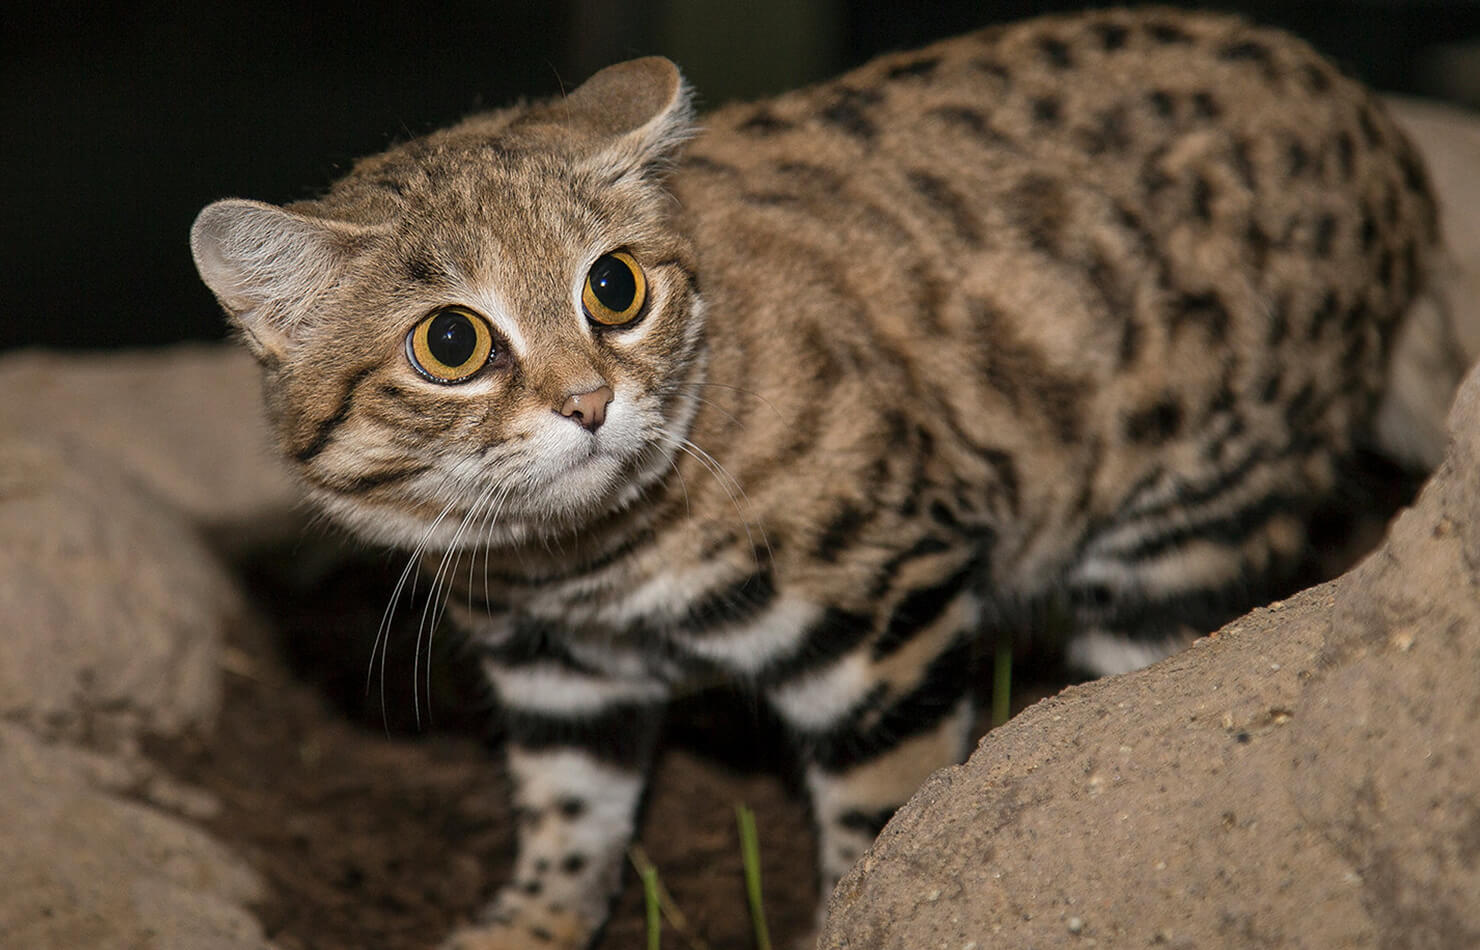 The Top 10 Smallest Cats In The World